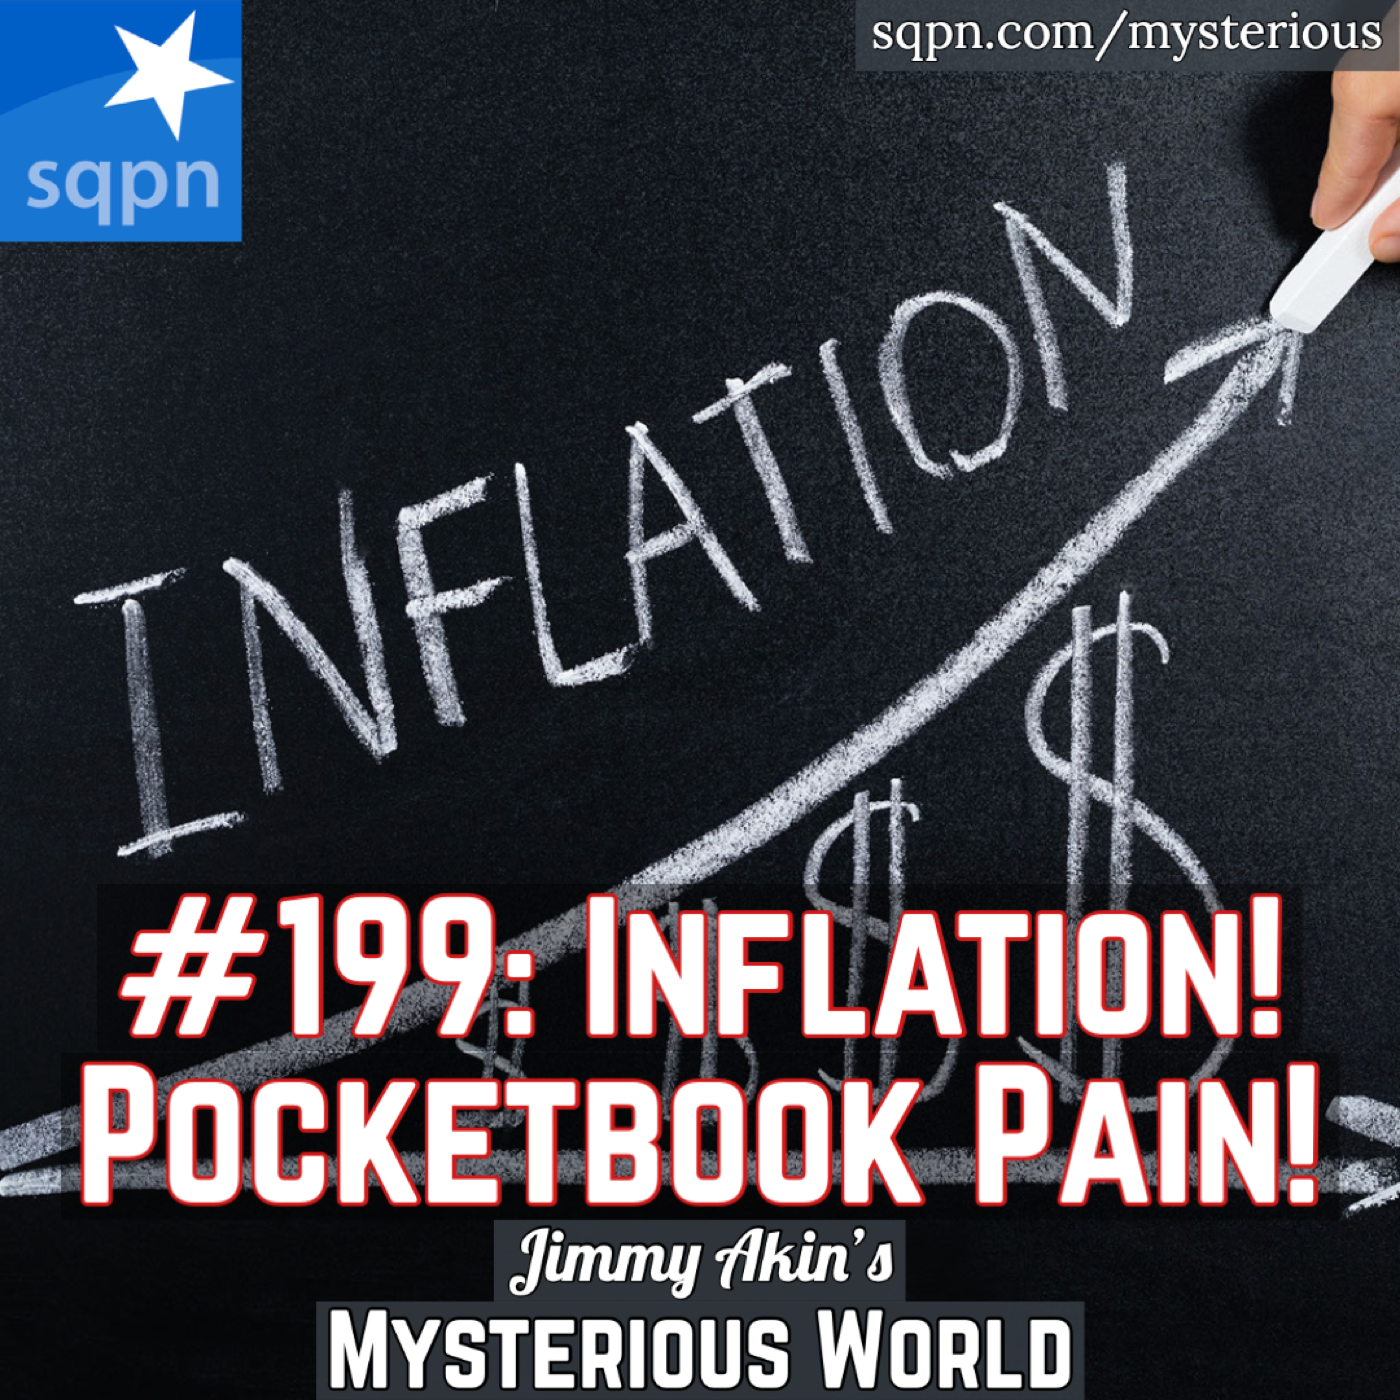 The Mystery of Inflation (Pocketbook Pain!)